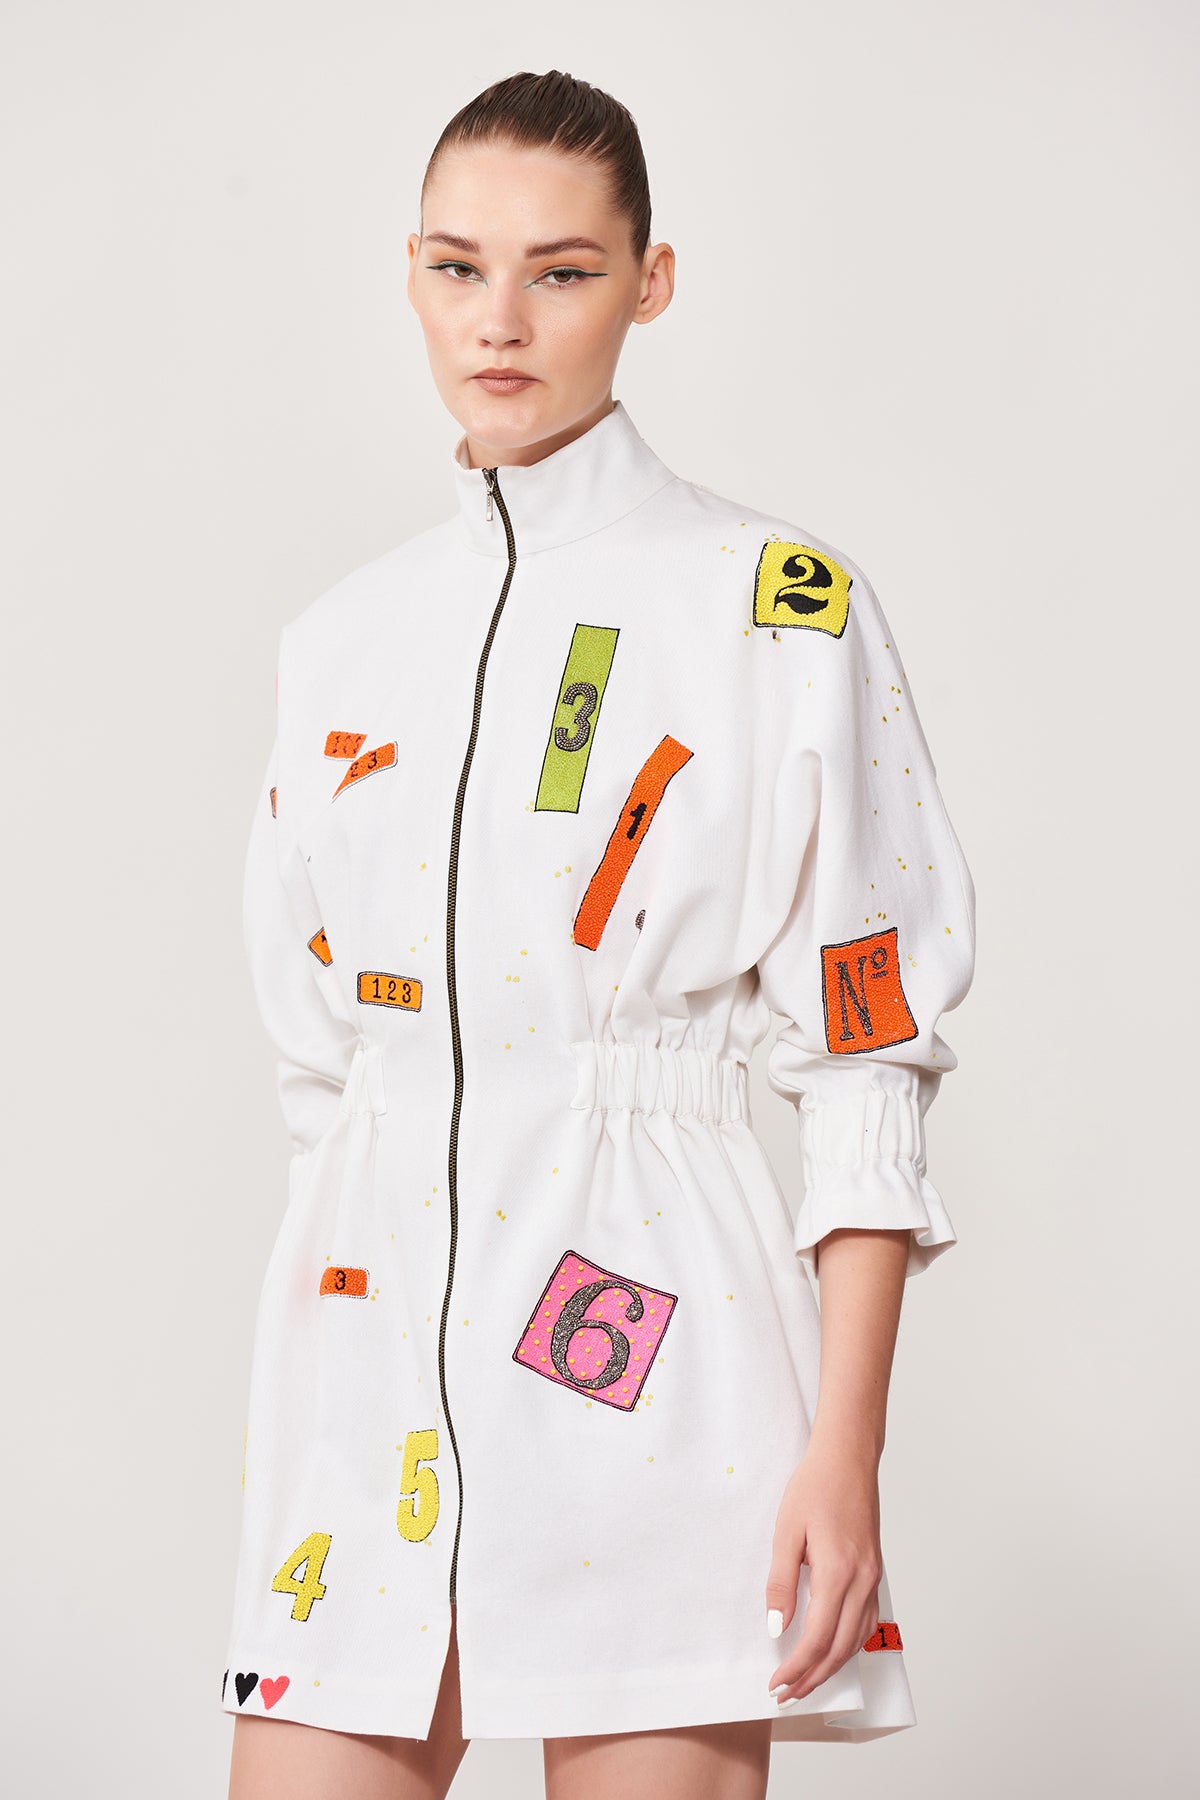 Odd and Even Numbers Jacket Dress